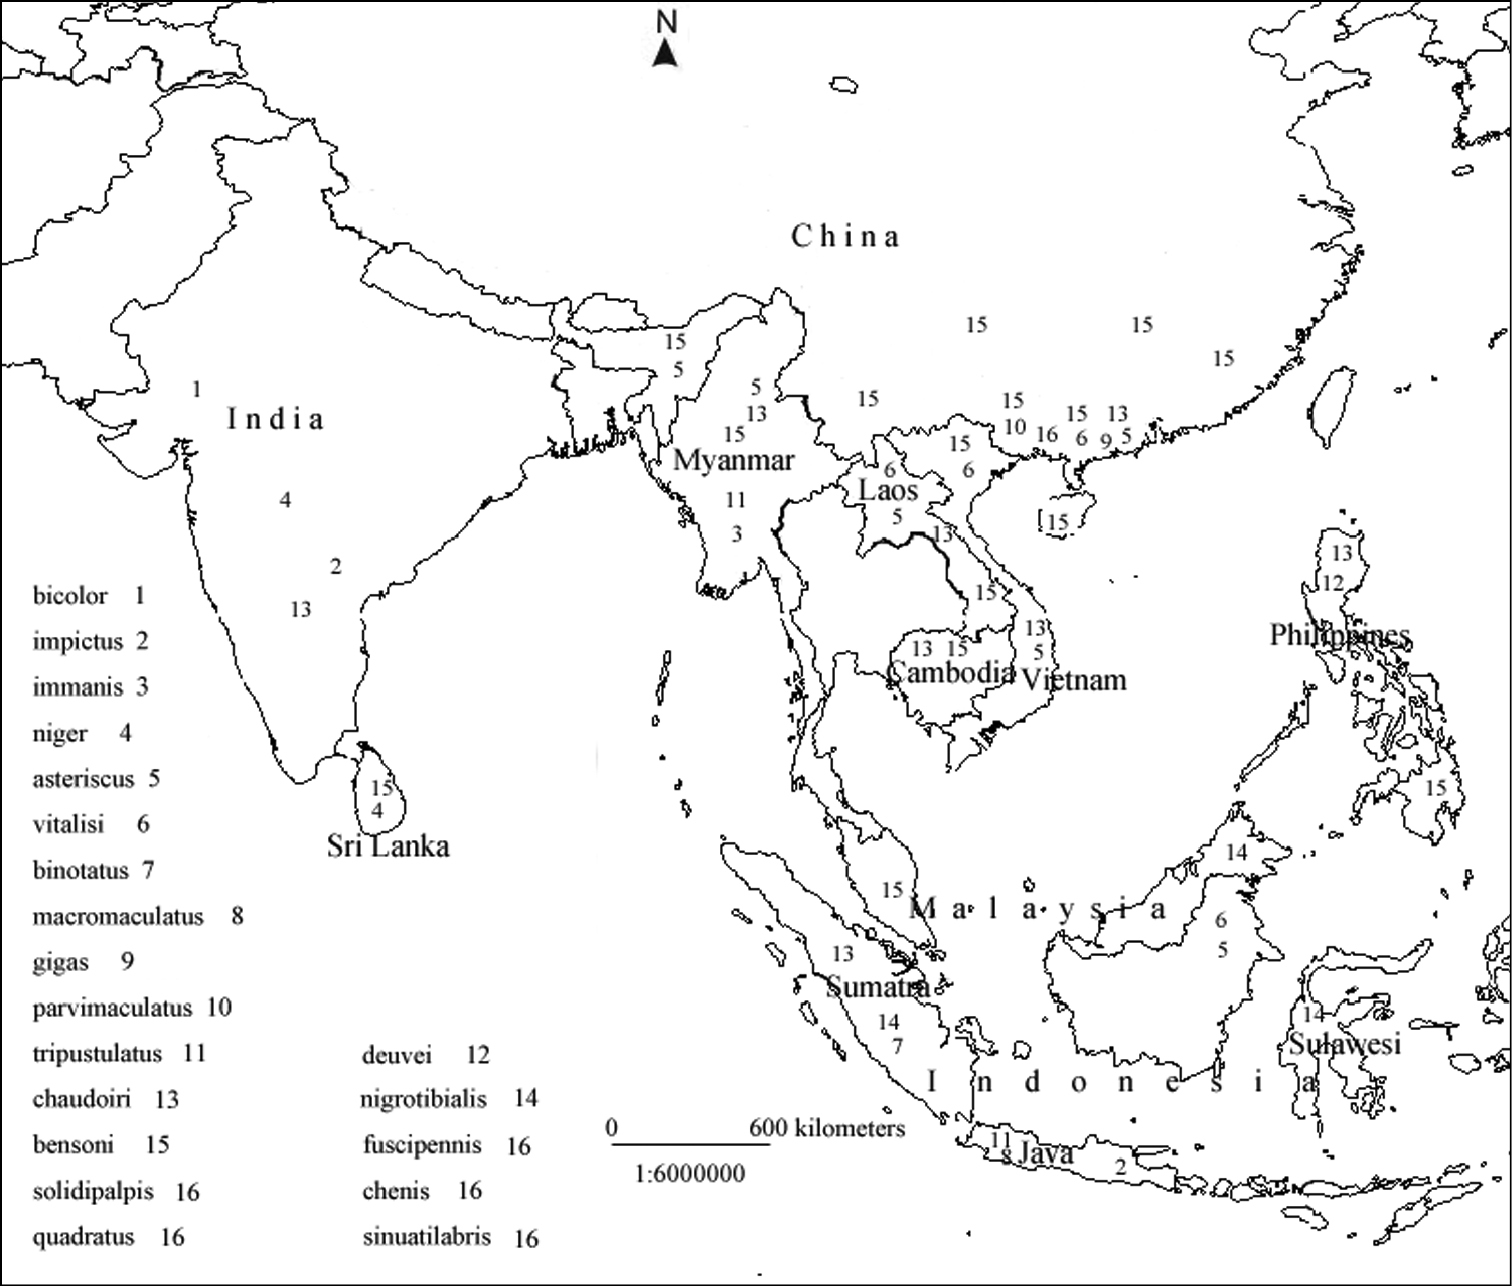 Asia Map Drawing at GetDrawings | Free download